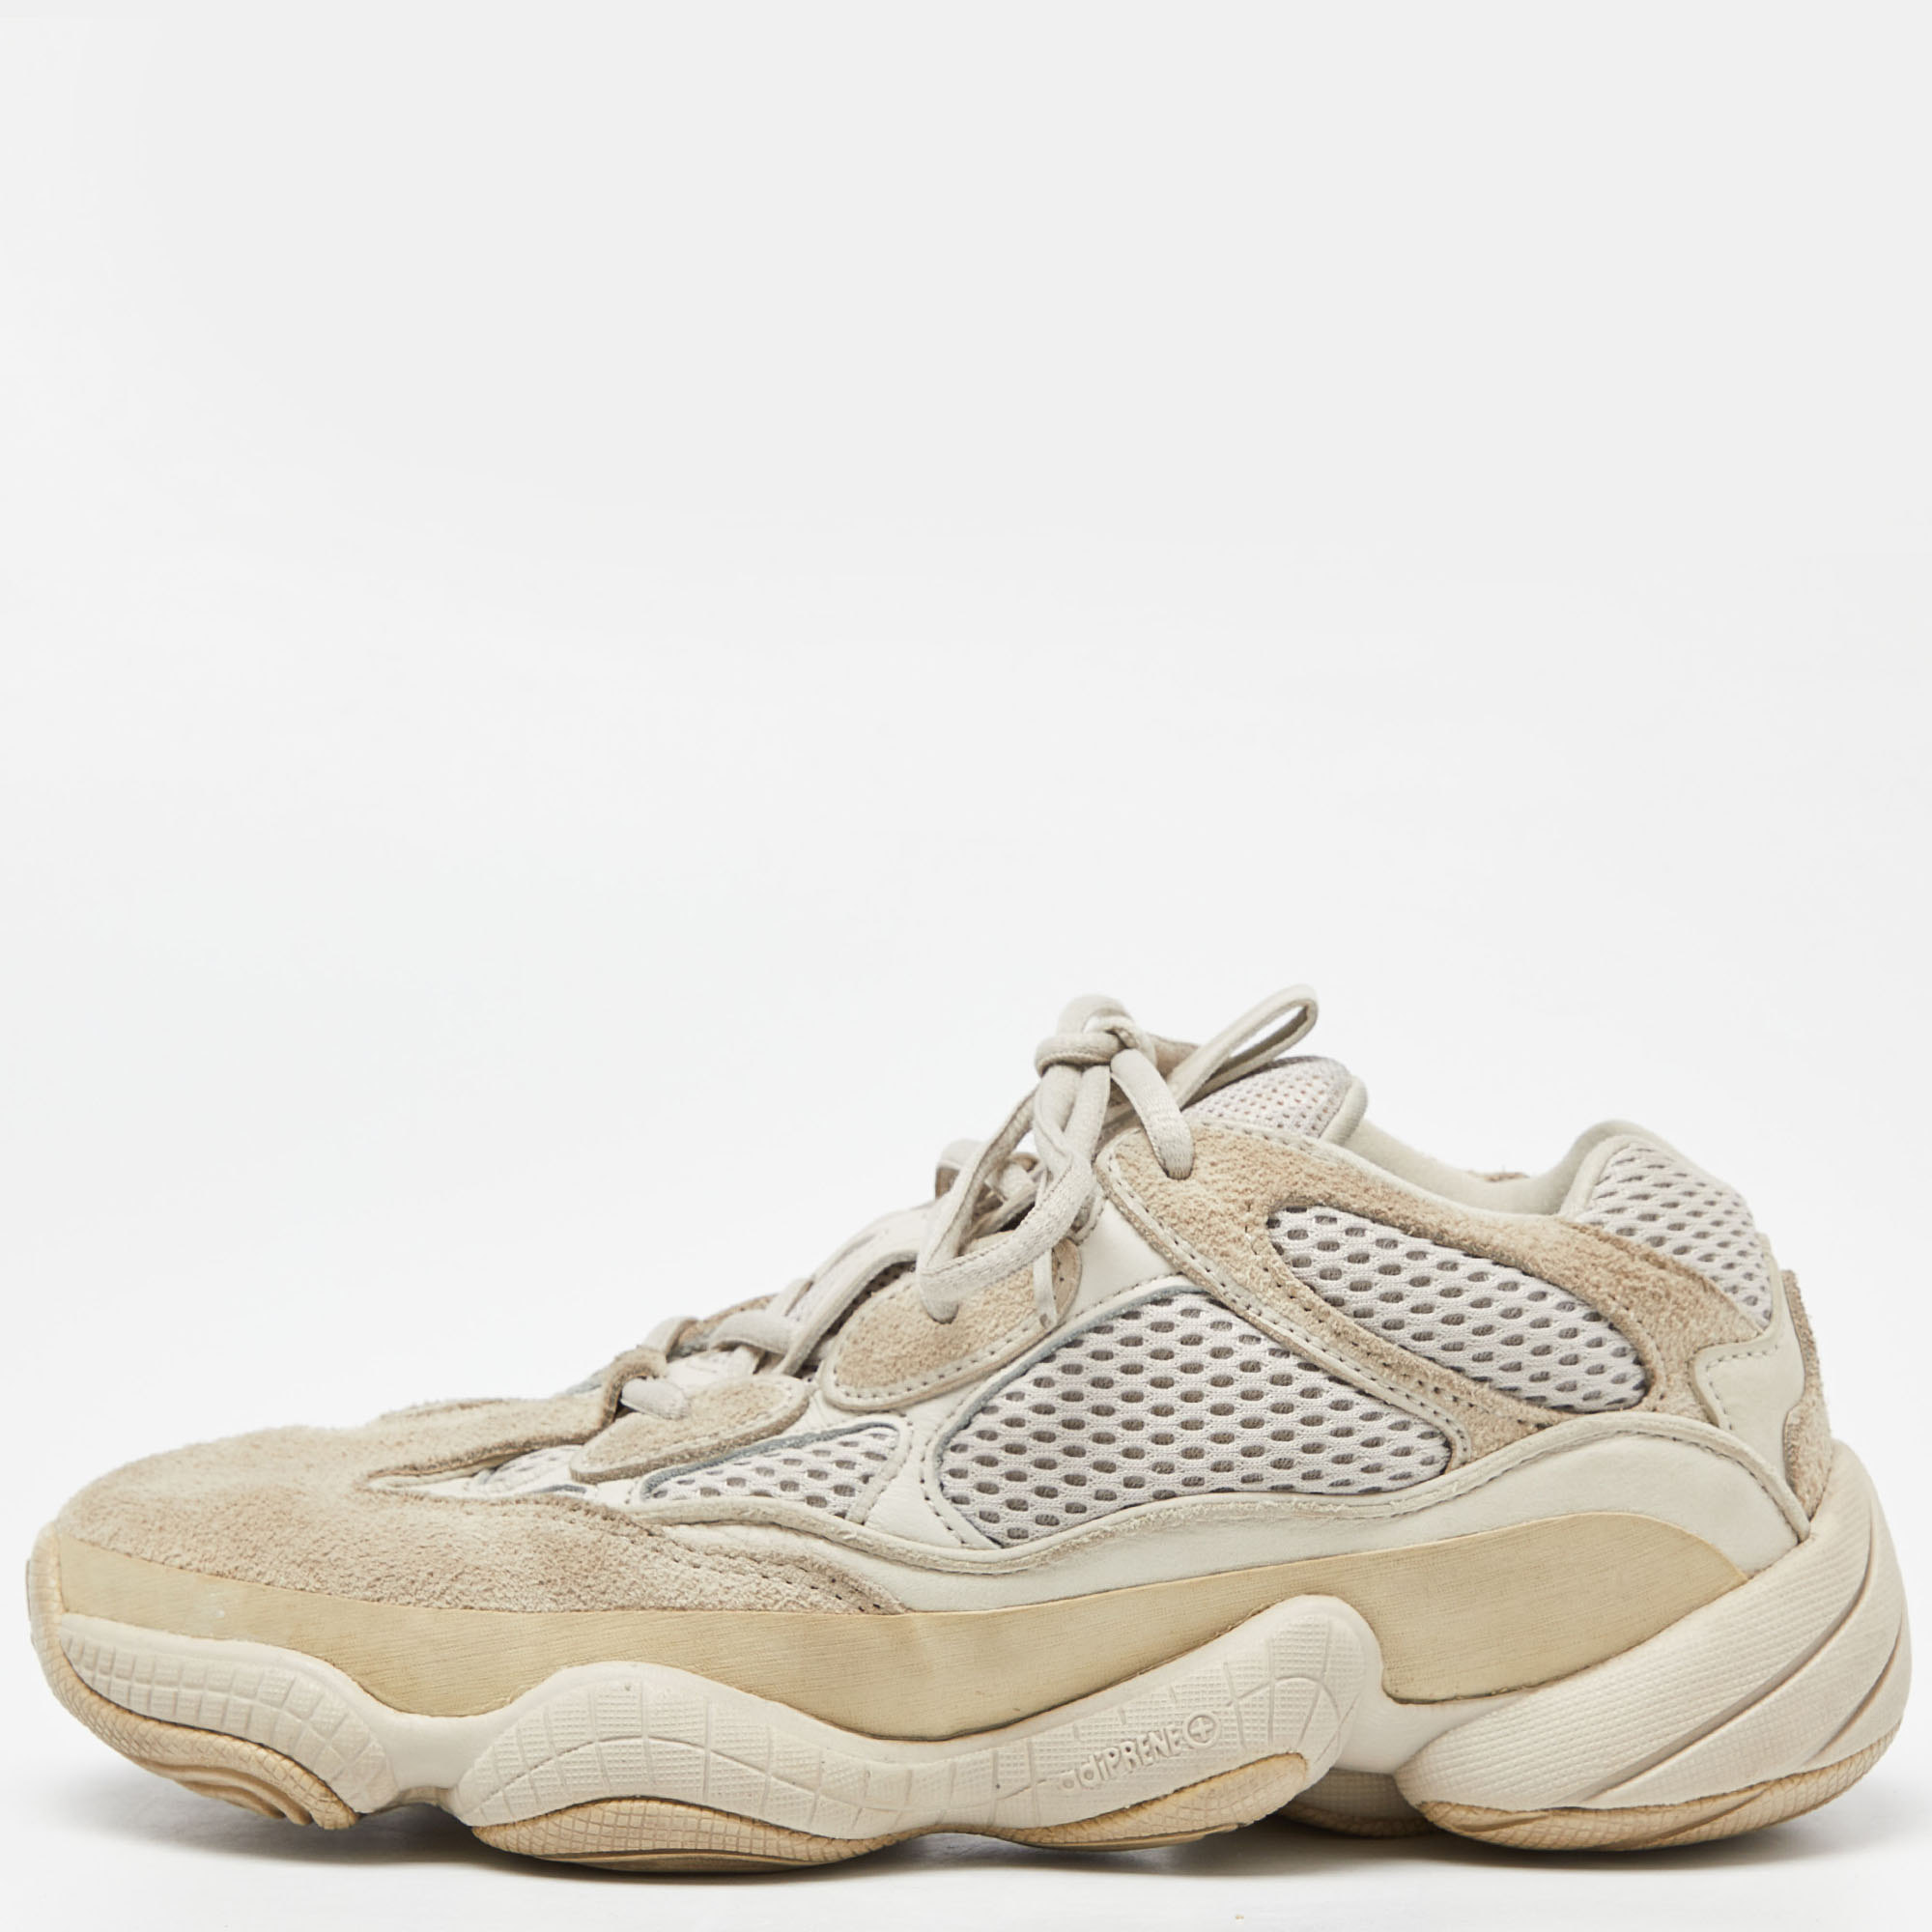 Yeezy x Adidas Grey/White Suede and Mesh Yeezy 500 blush Sneakers Size 39 1/3